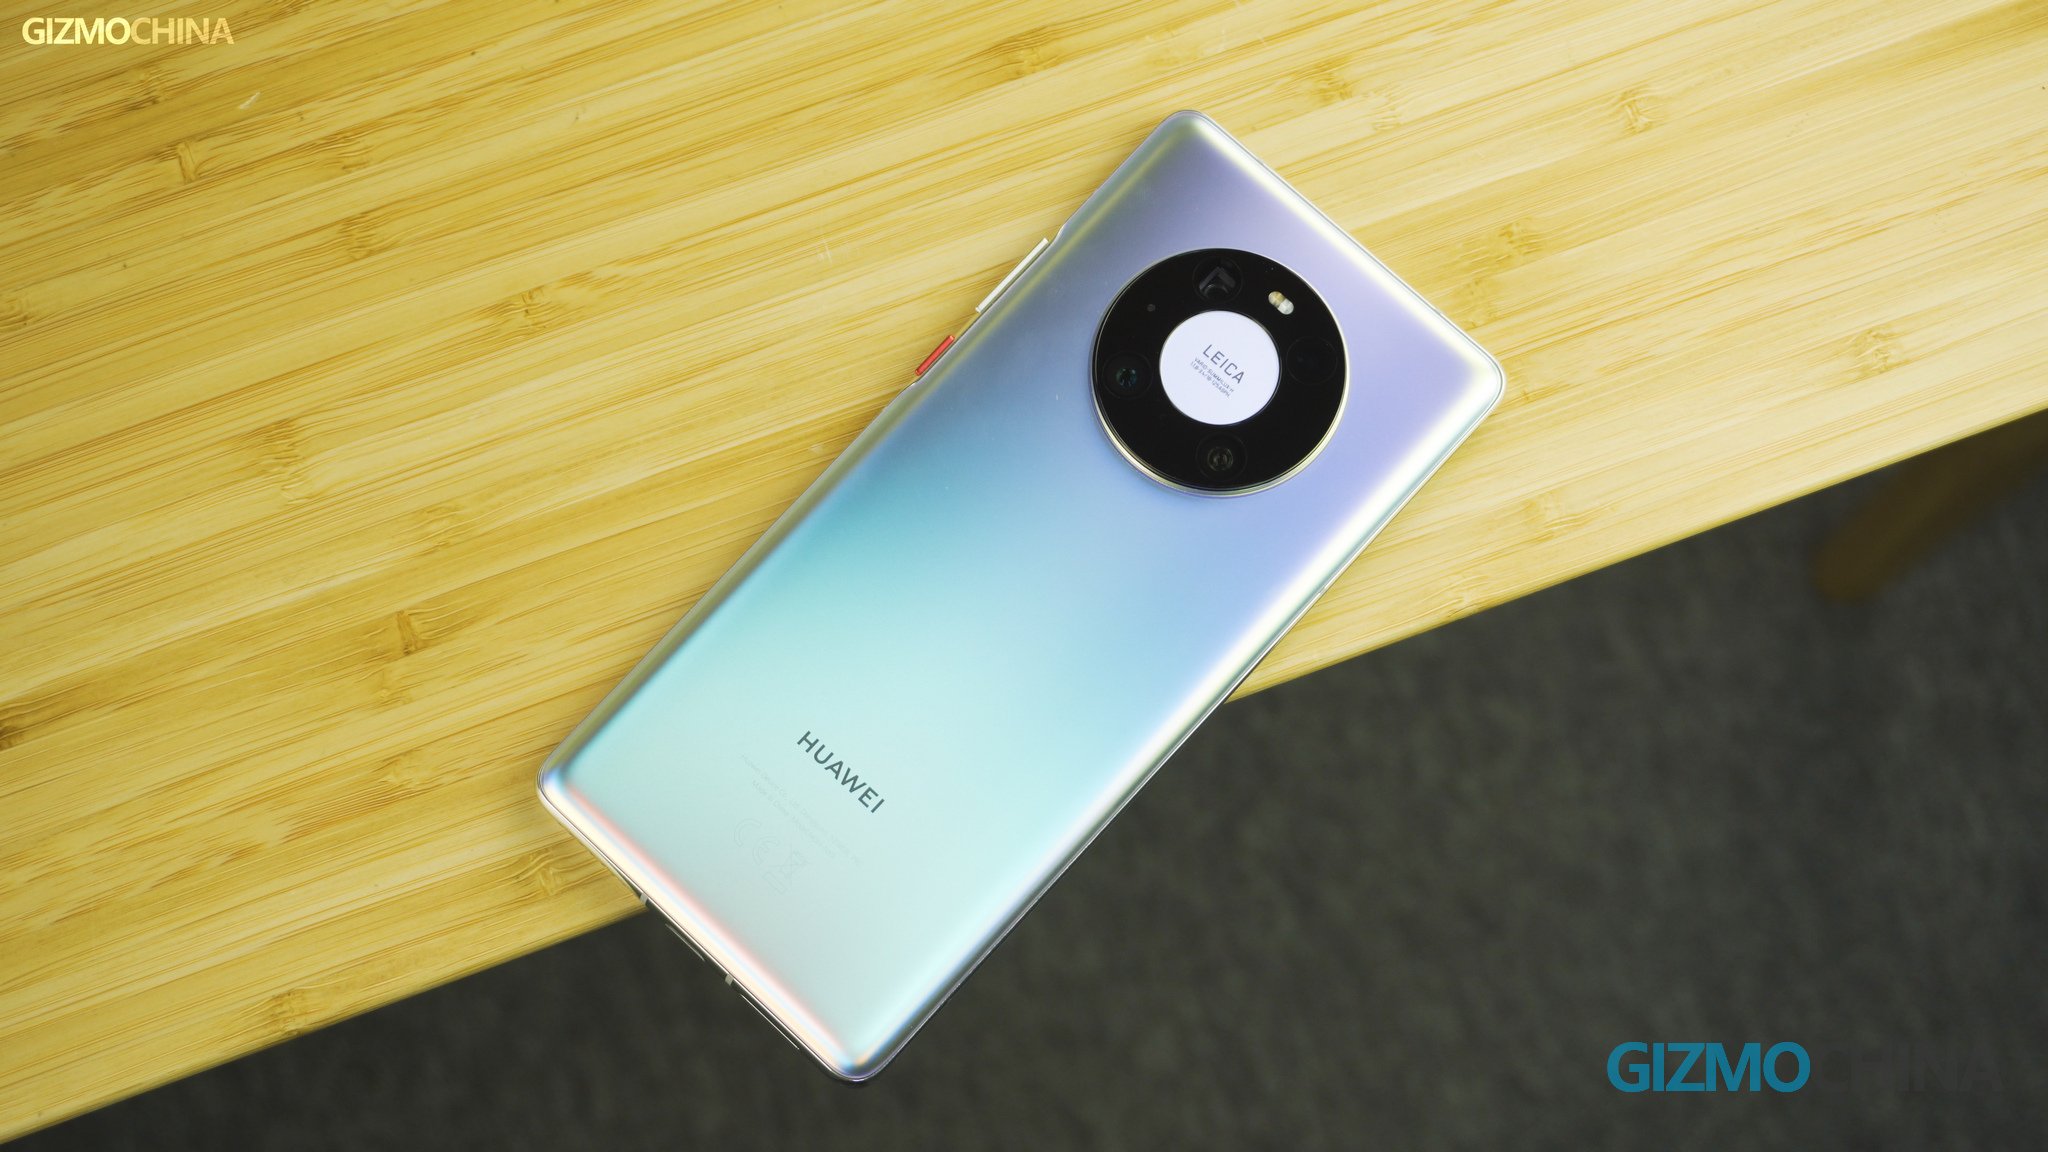 Master Lu ranks ColorOS as the smoothest UI of 2020, Huawei remains the performance king!